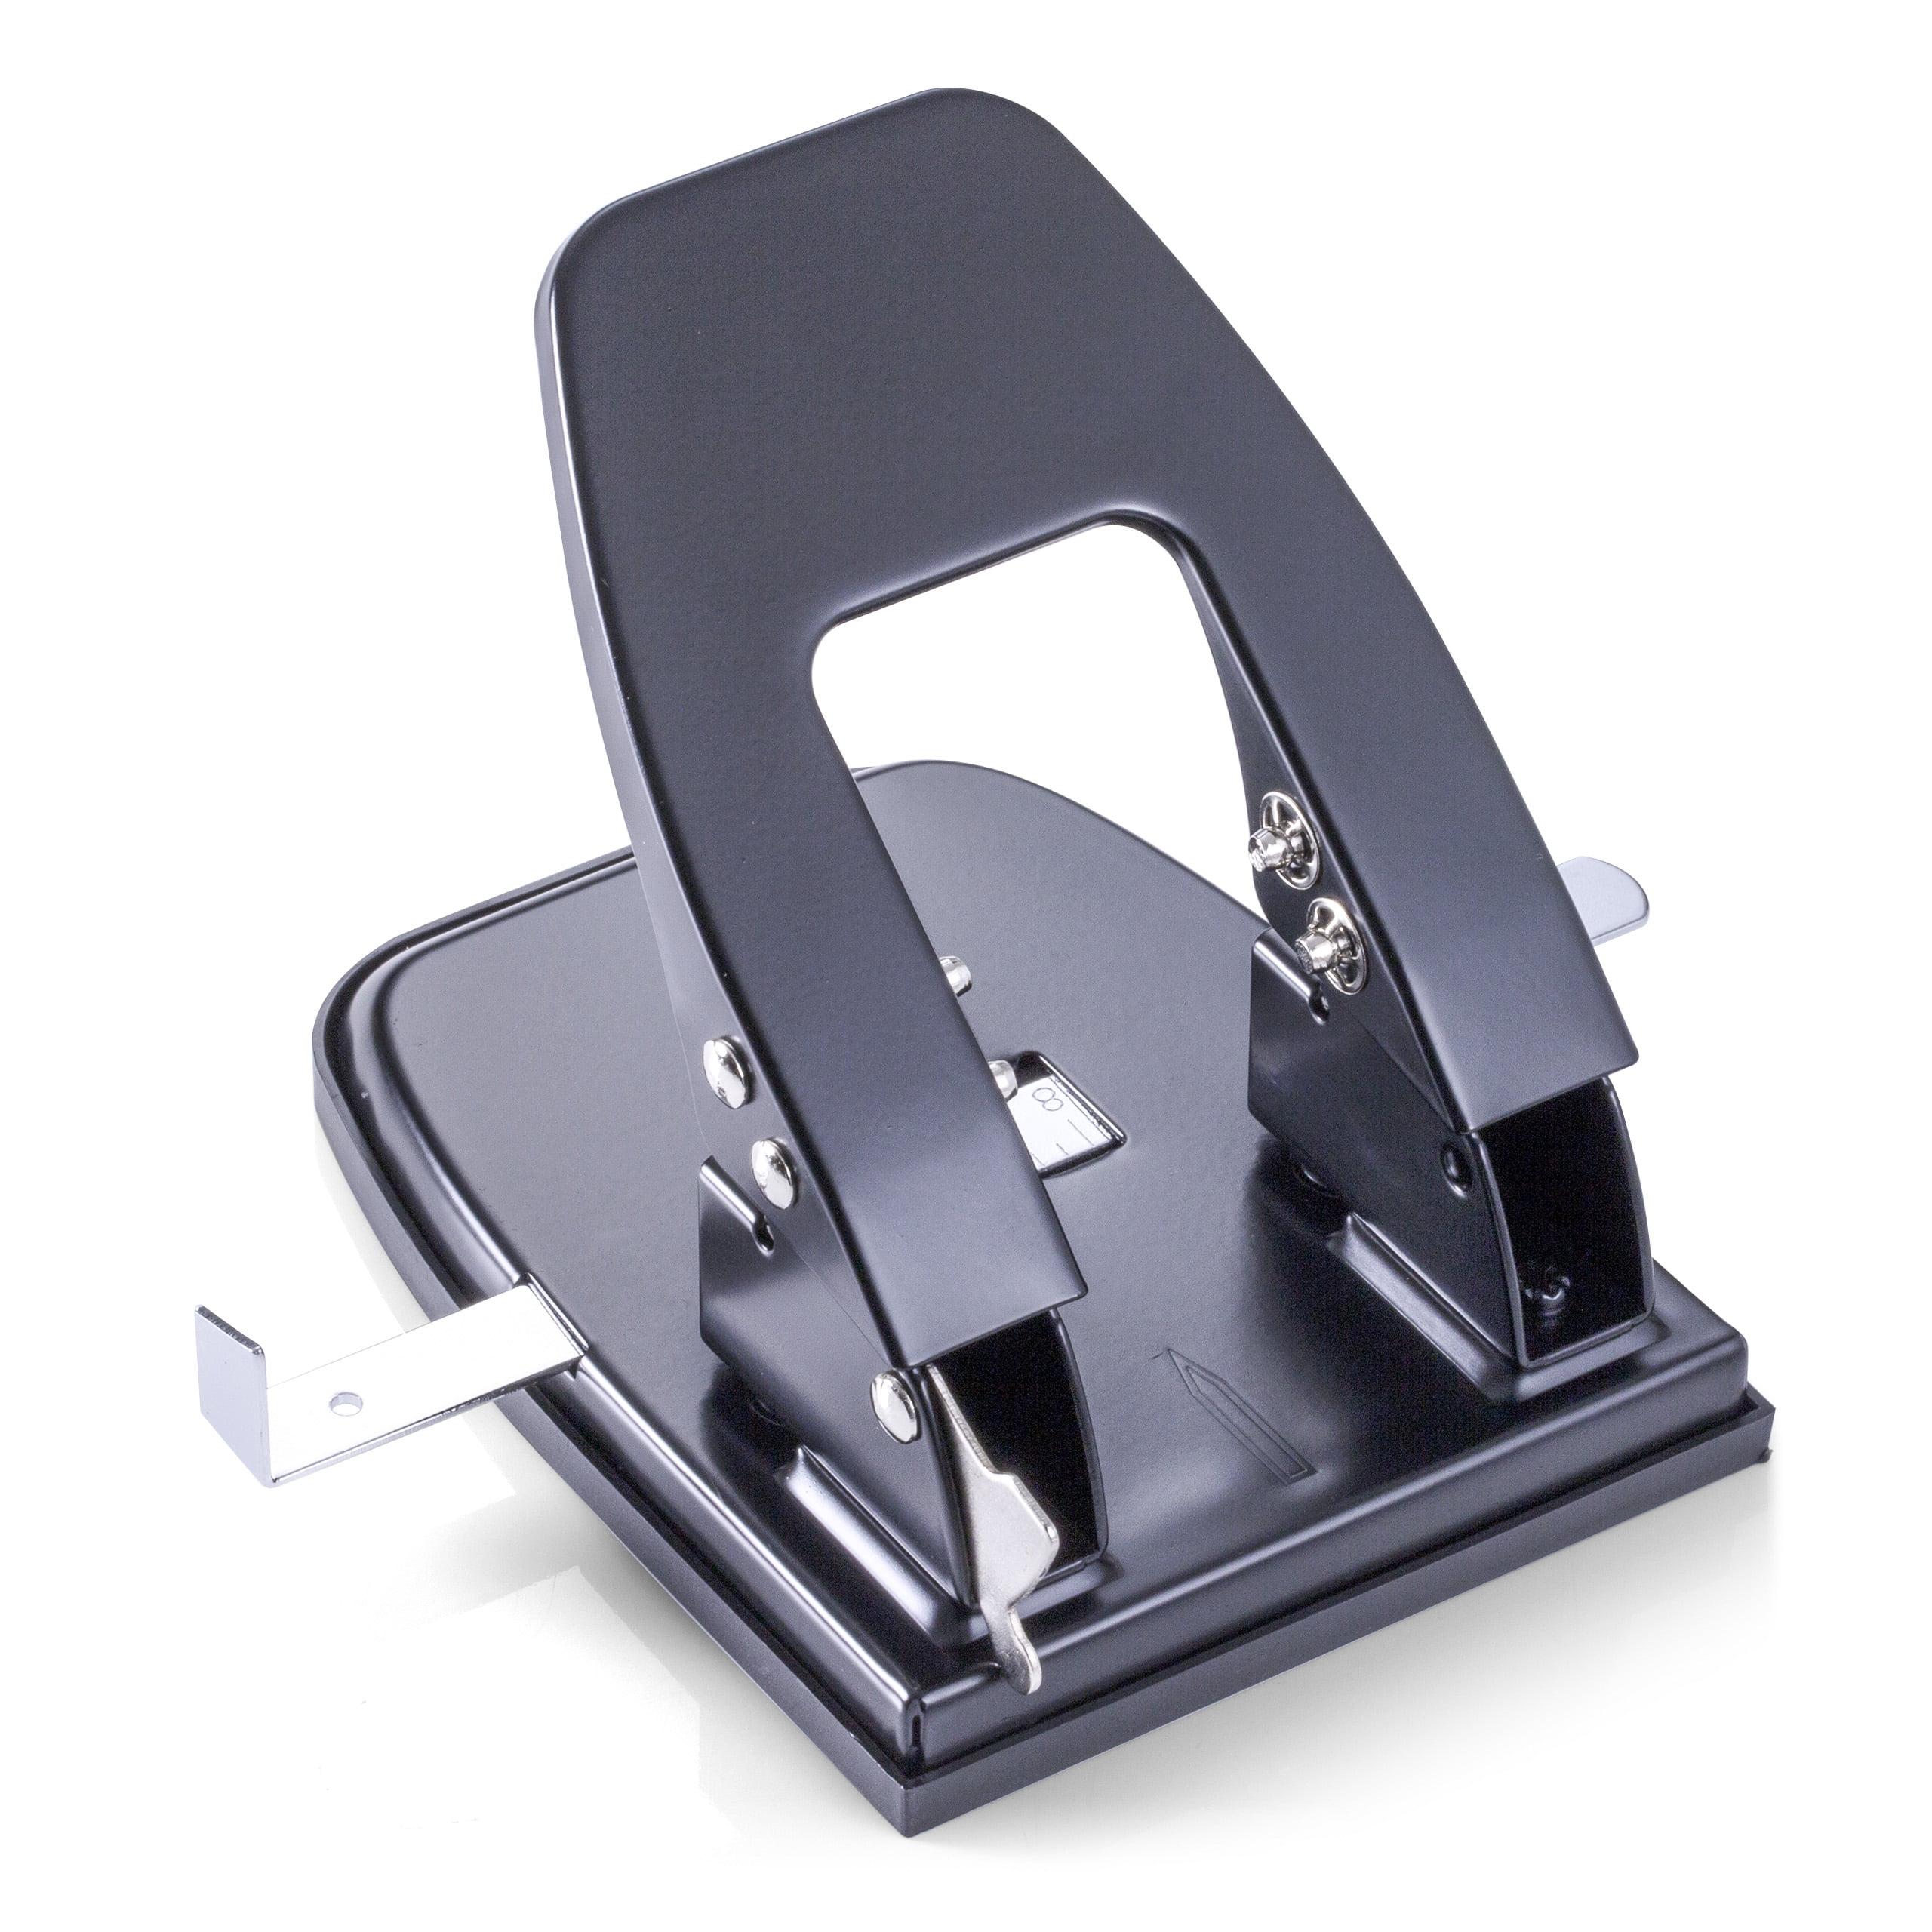 2 Hole Punch, Metal Hole Puncher With Safety Lock Function & Scale, 10  Sheet Punch Capacity, Labor Saving, Office School Supply - Hole Punch -  AliExpress